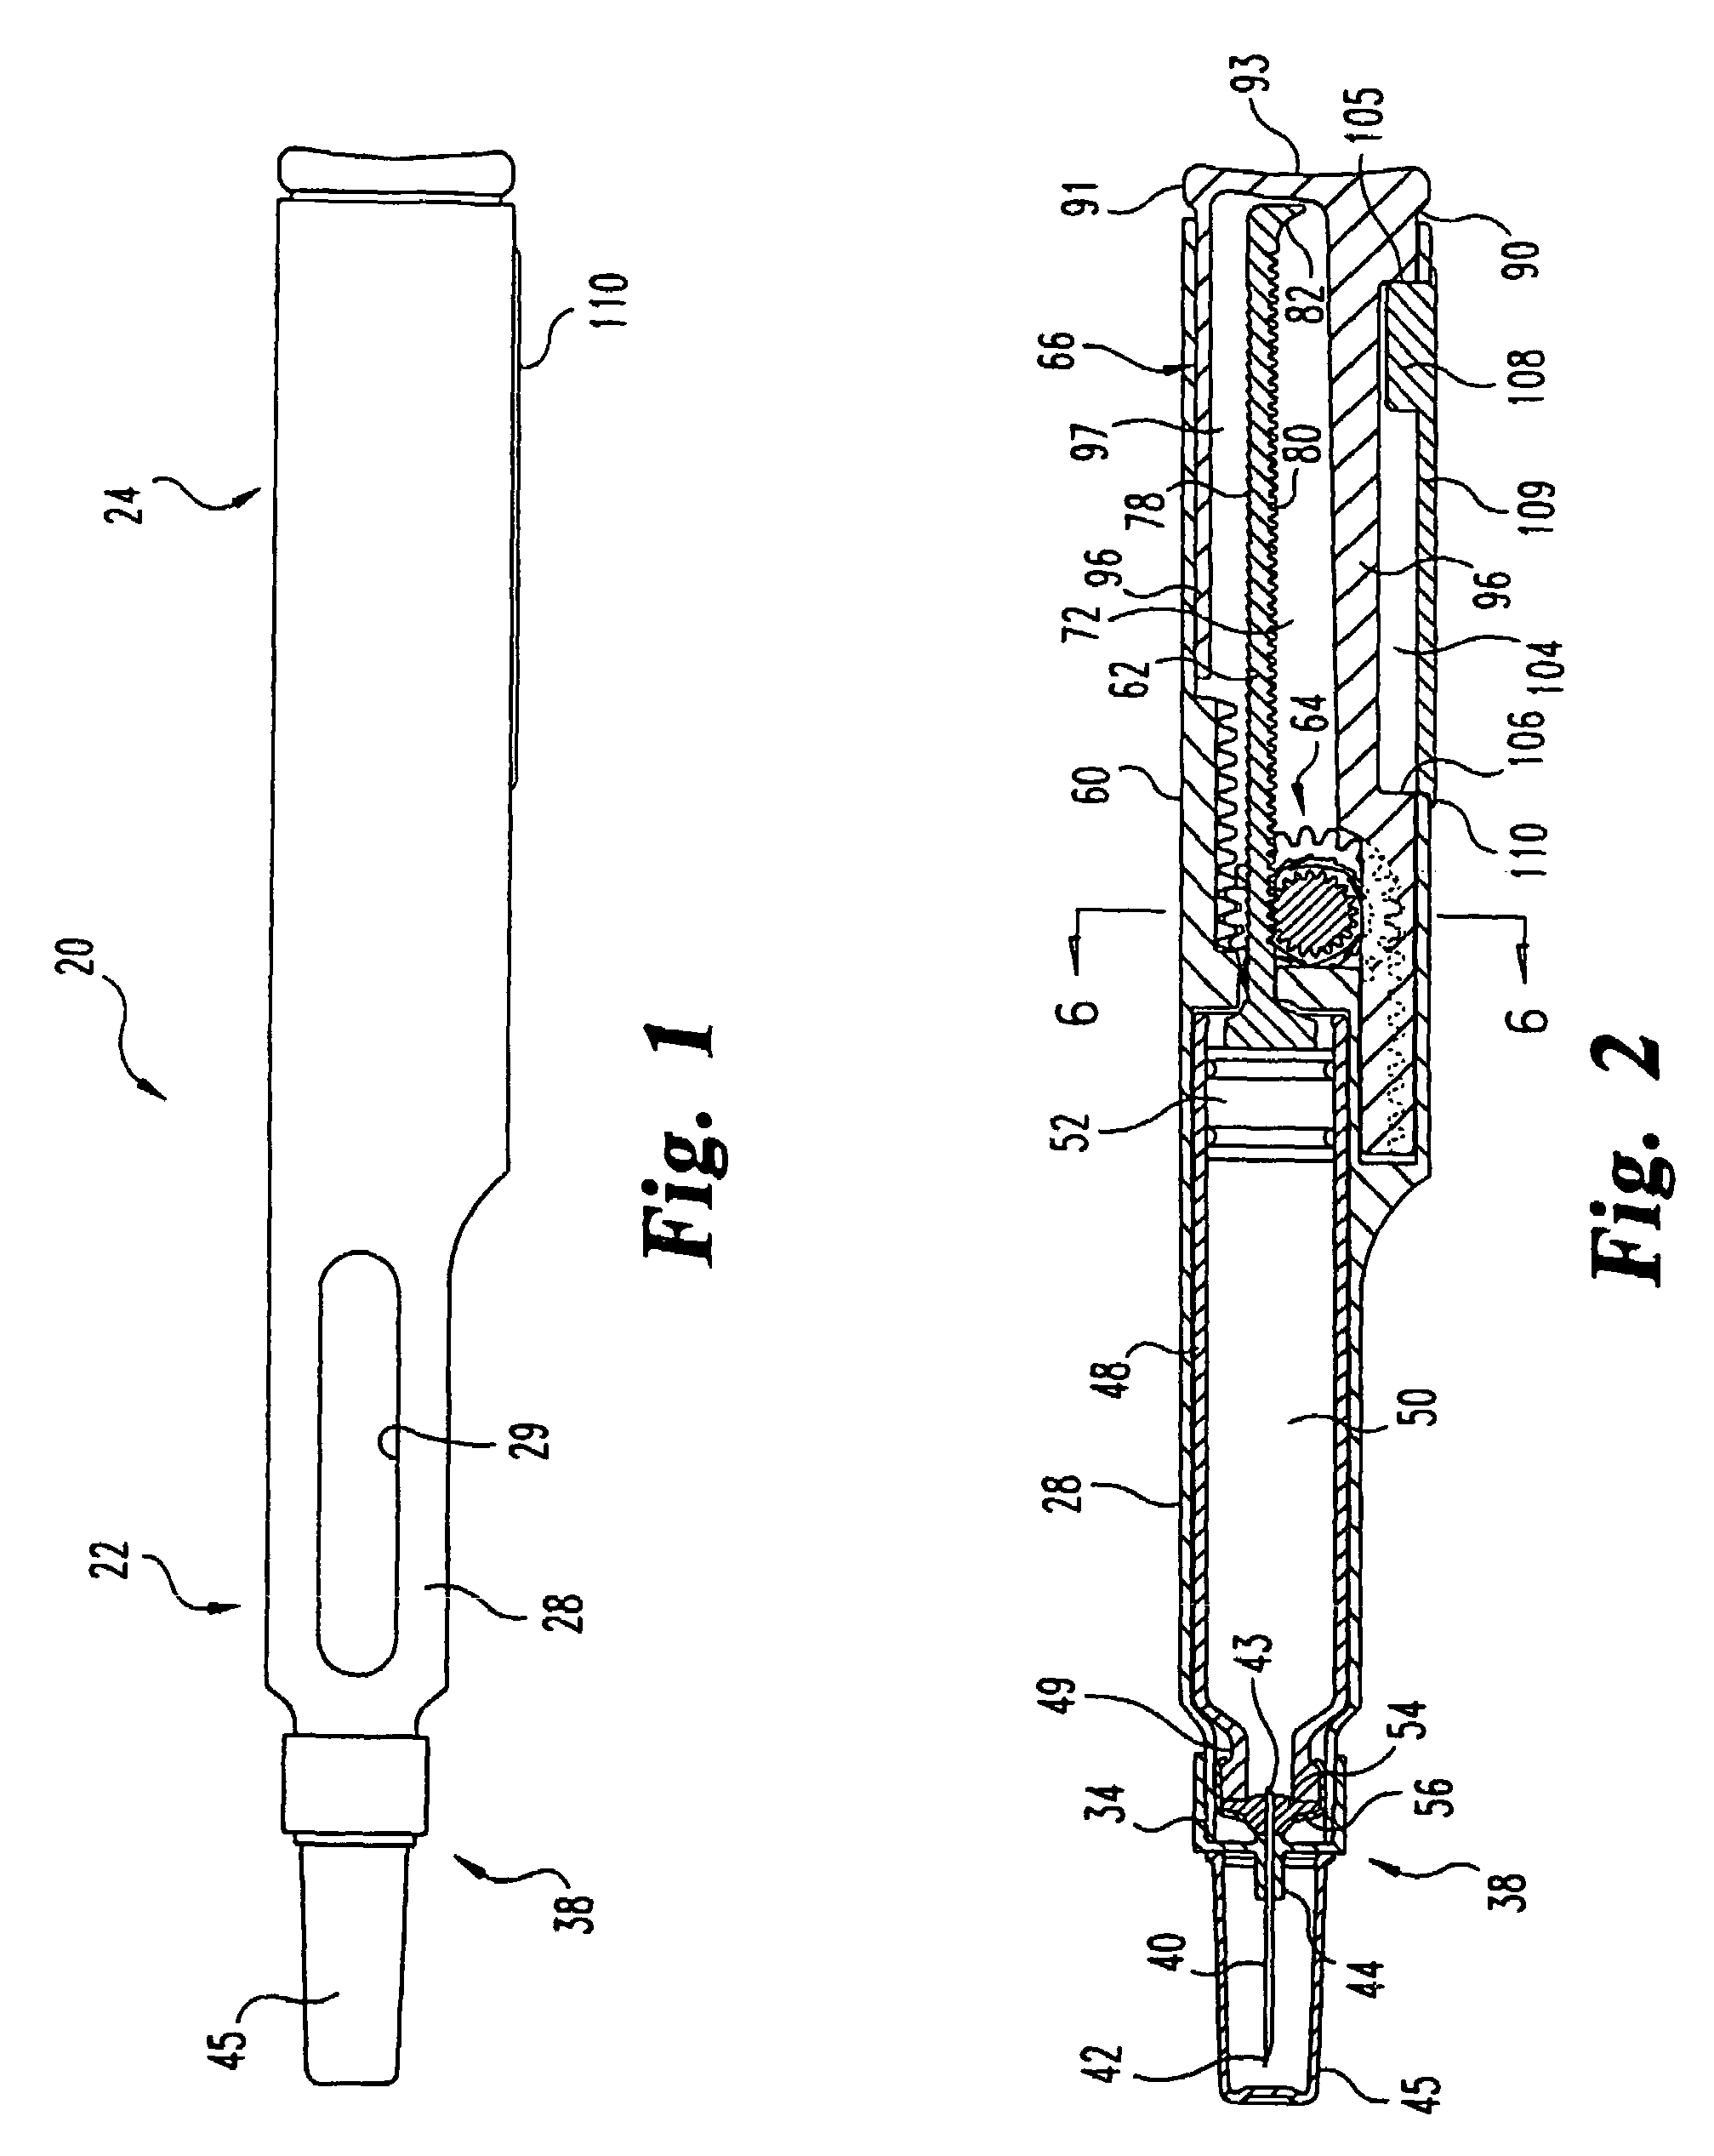 Medication dispensing apparatus with gear set for mechanical advantage